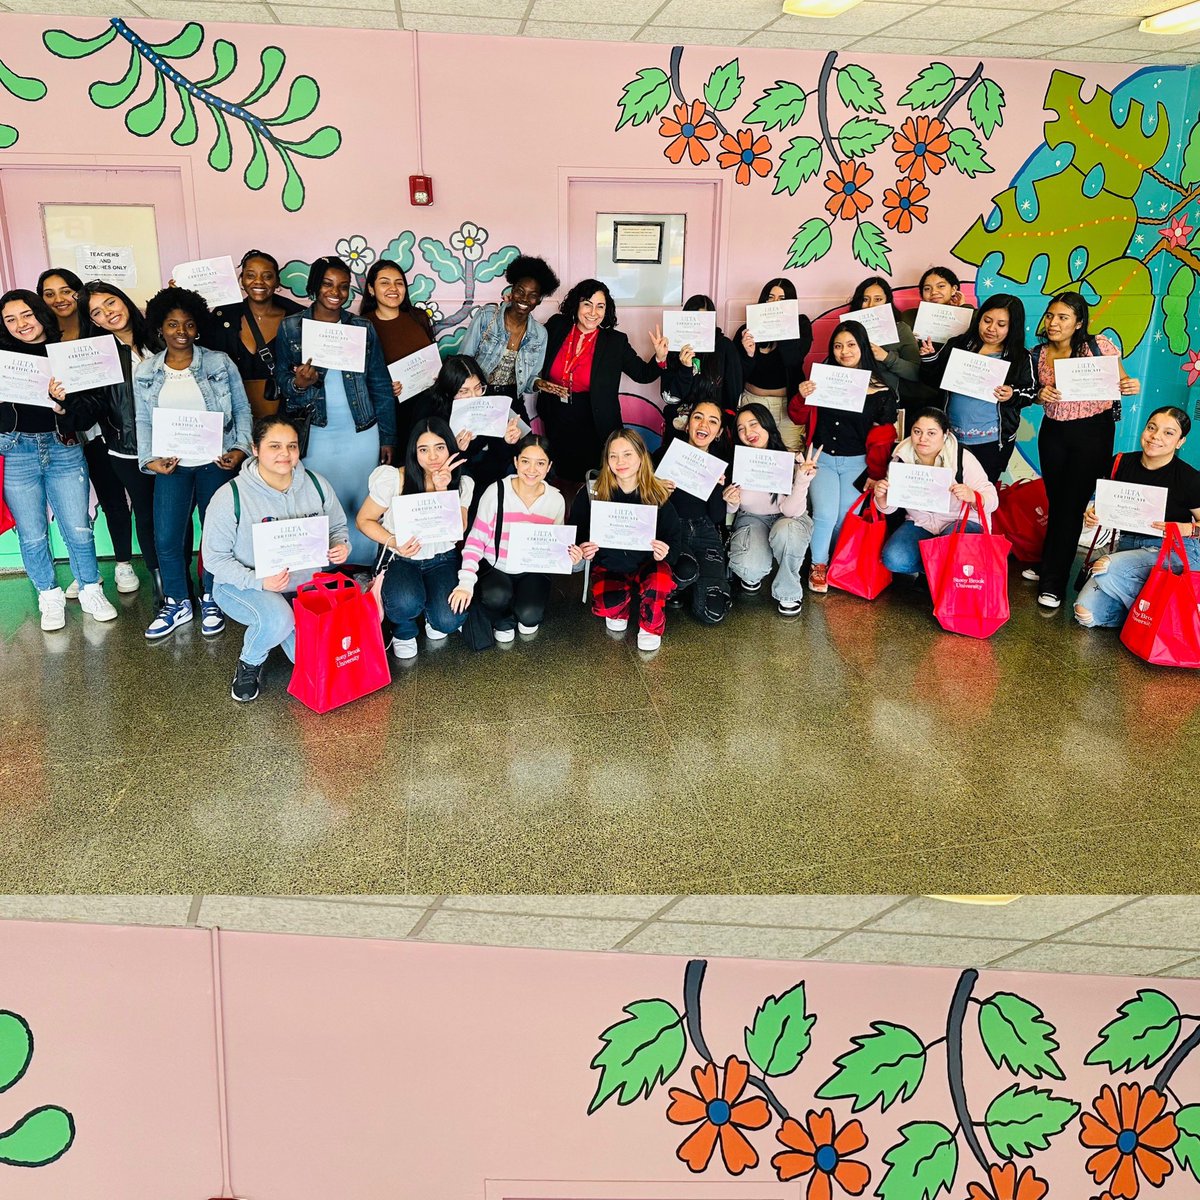 Our @UniondaleUFSD High School girls participated in @LILTA_inc Women’s Conference today @stonybrooku Celebrating Women’s History Month and getting inspired for their future successes. #womenshistorymonth